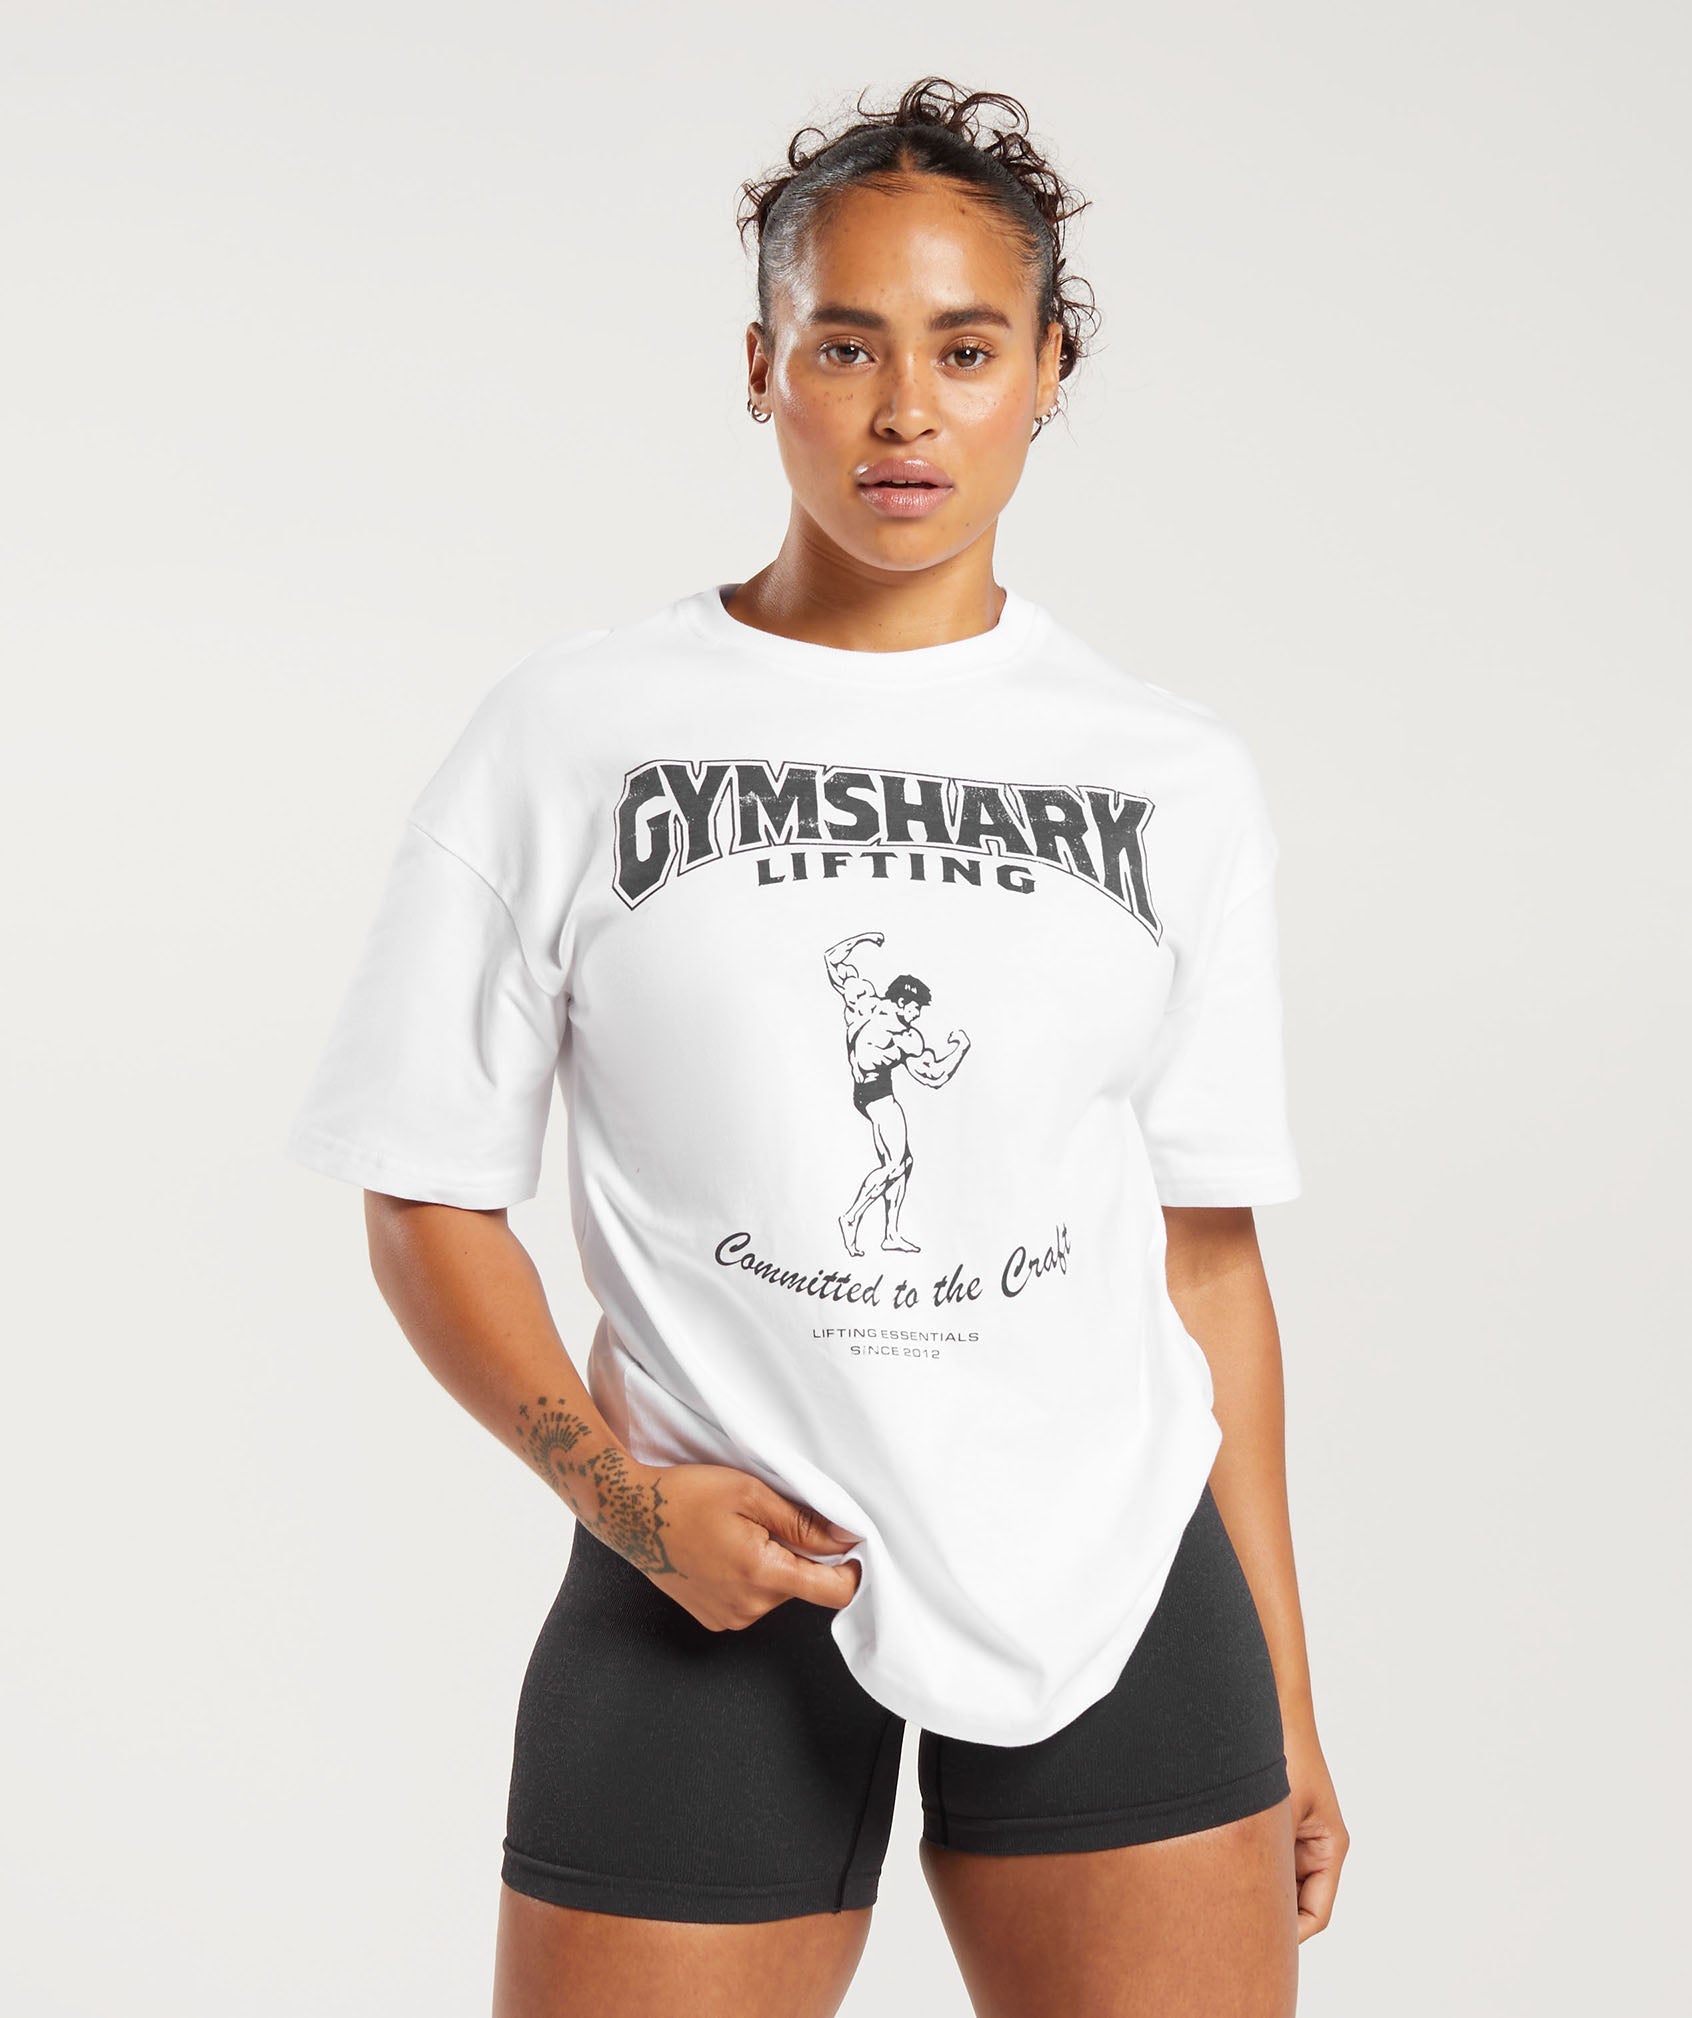 Gymshark Committed To The Craft T-Shirt - White | Gymshark